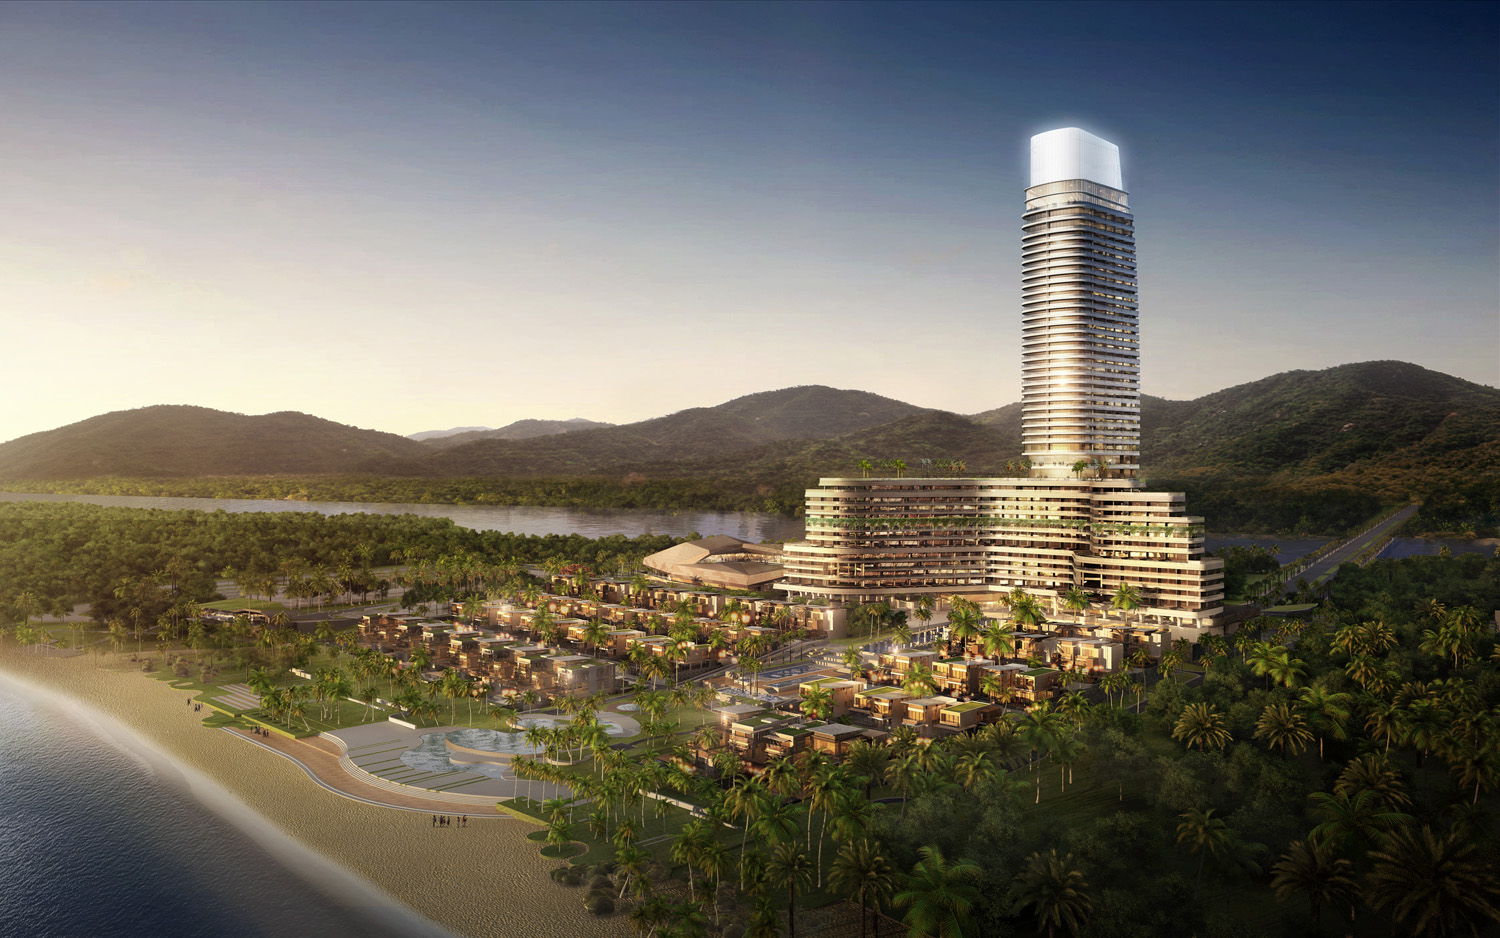 The complex will feature a 729-key resort hotel and serviced apartment tower, a 